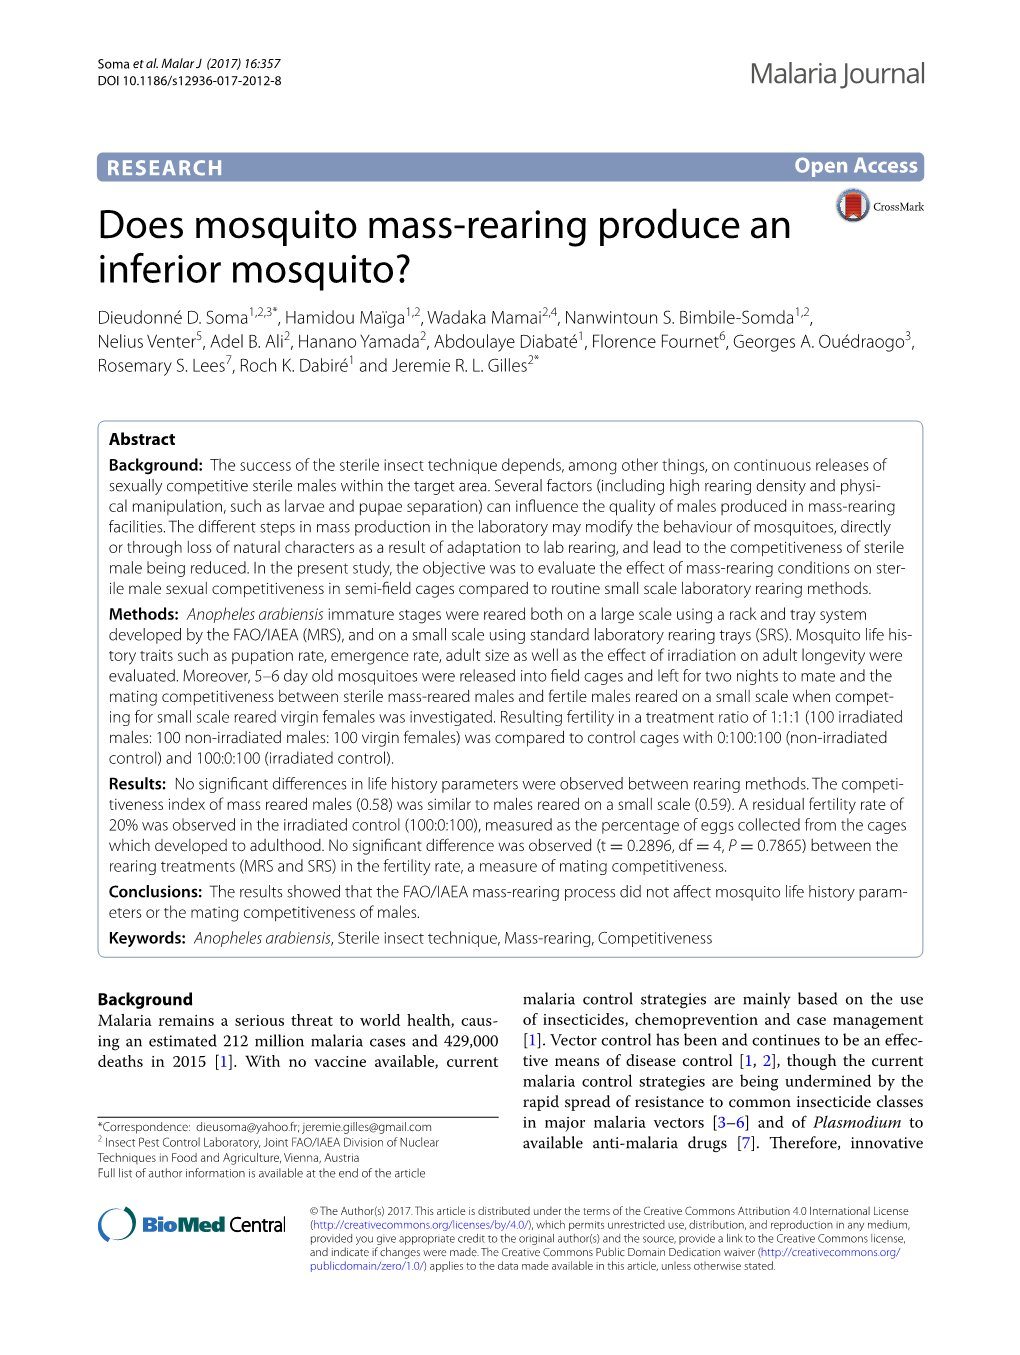 Does Mosquito Mass-Rearing Produce an Inferior Mosquito?